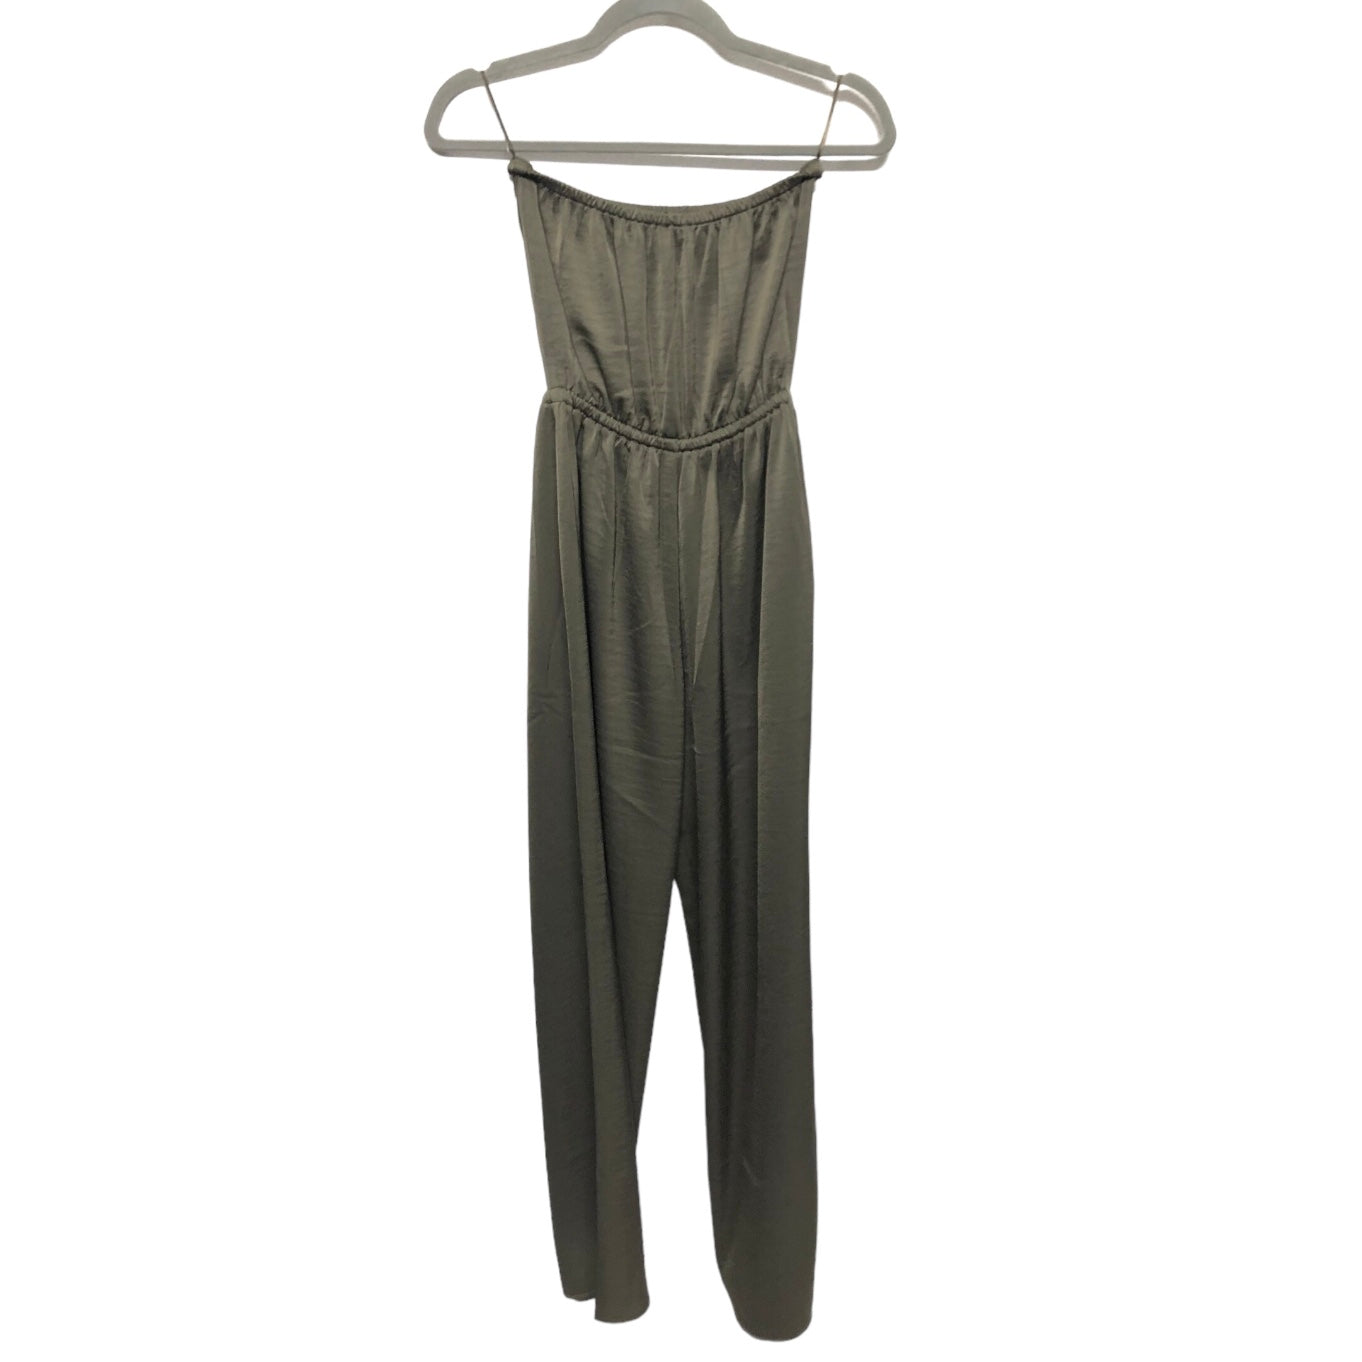 Green Jumpsuit Express, Size Xs